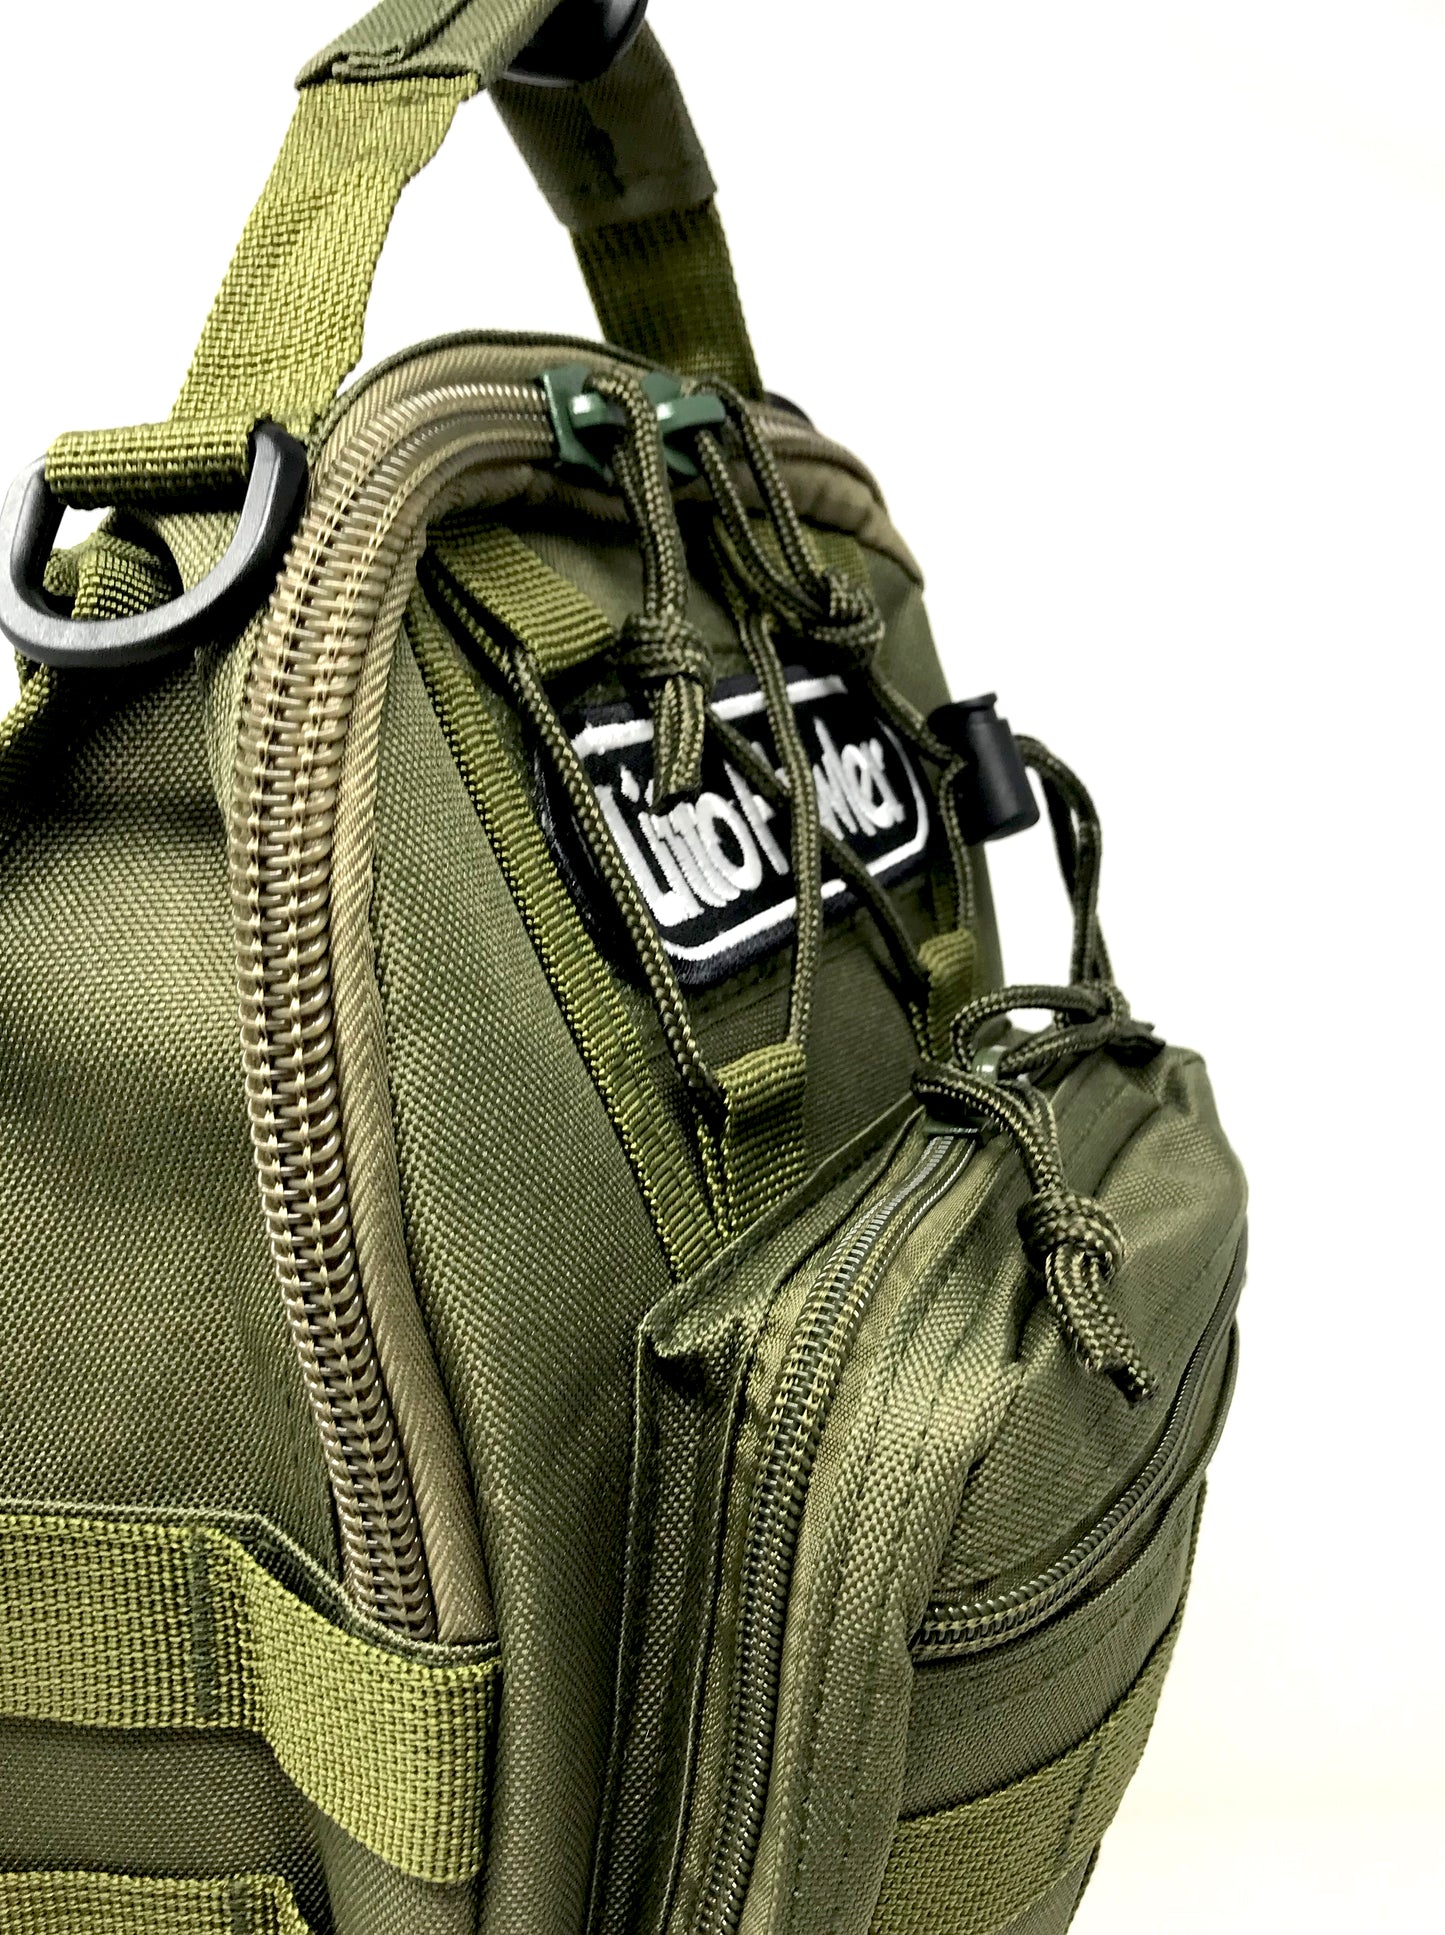 Explore Pack - Olive Green